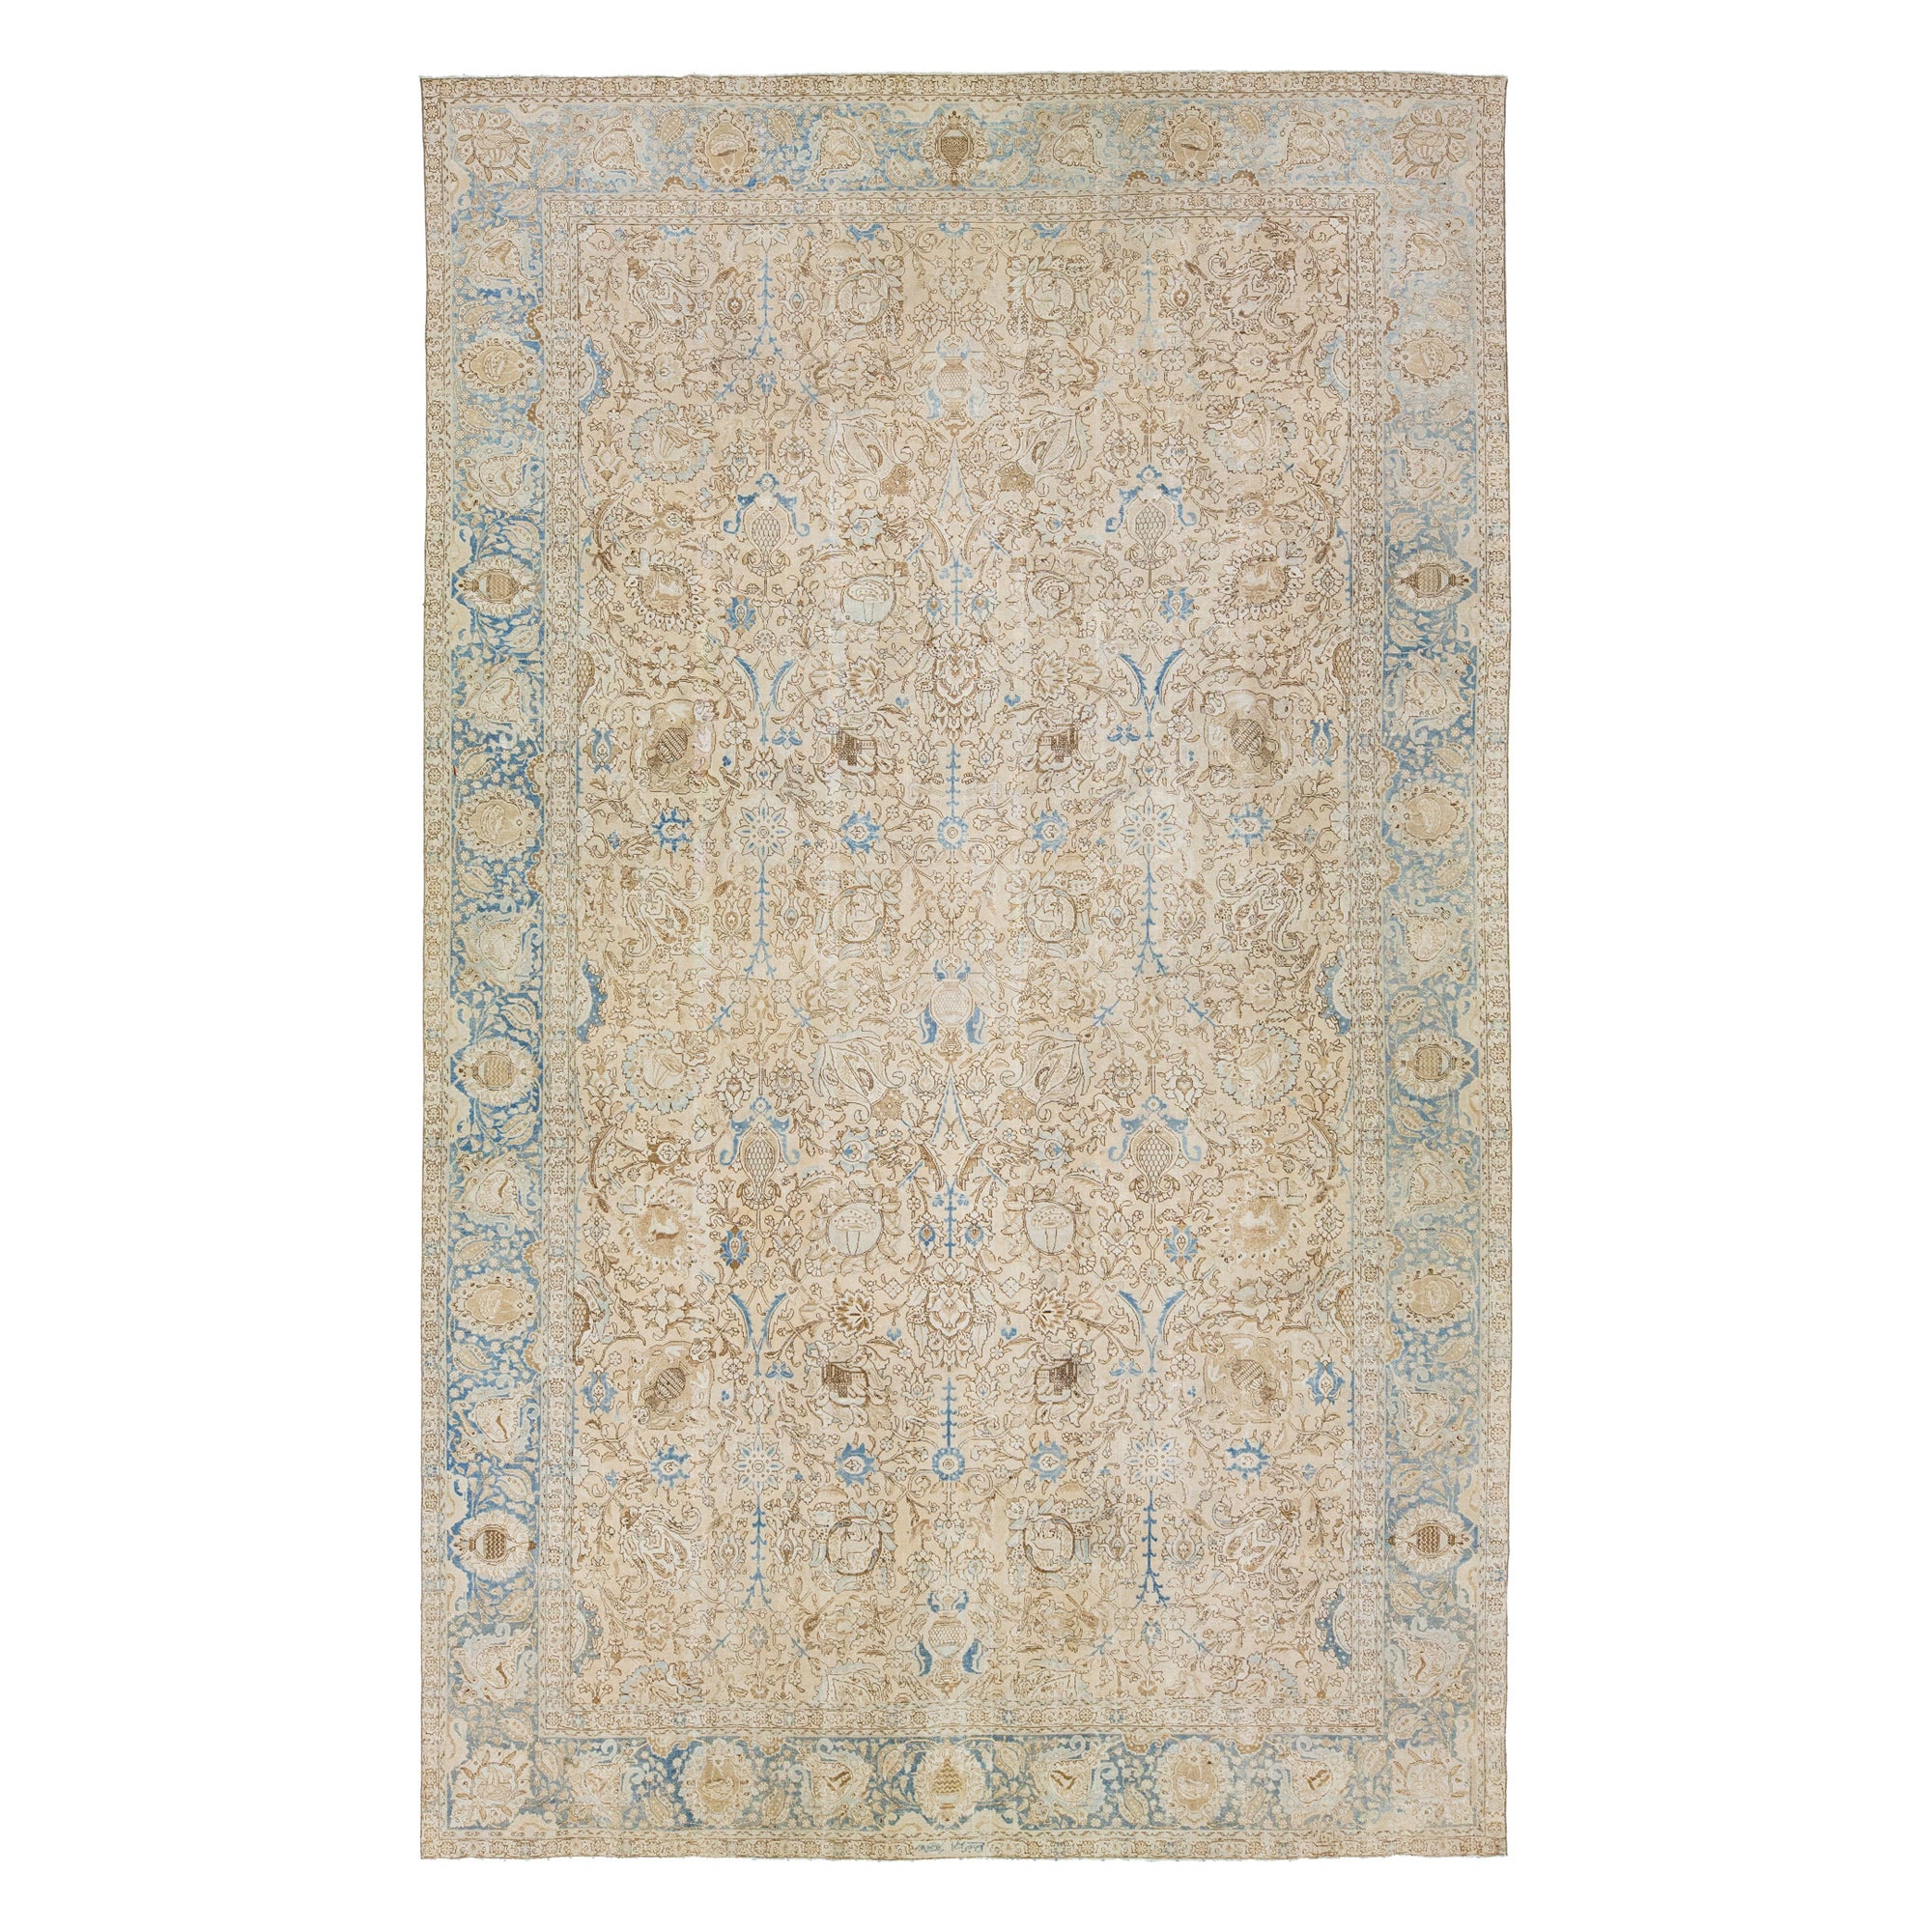 Allover Designed Antique Wool Rug Persian Tabriz From 1910s In Beige For Sale